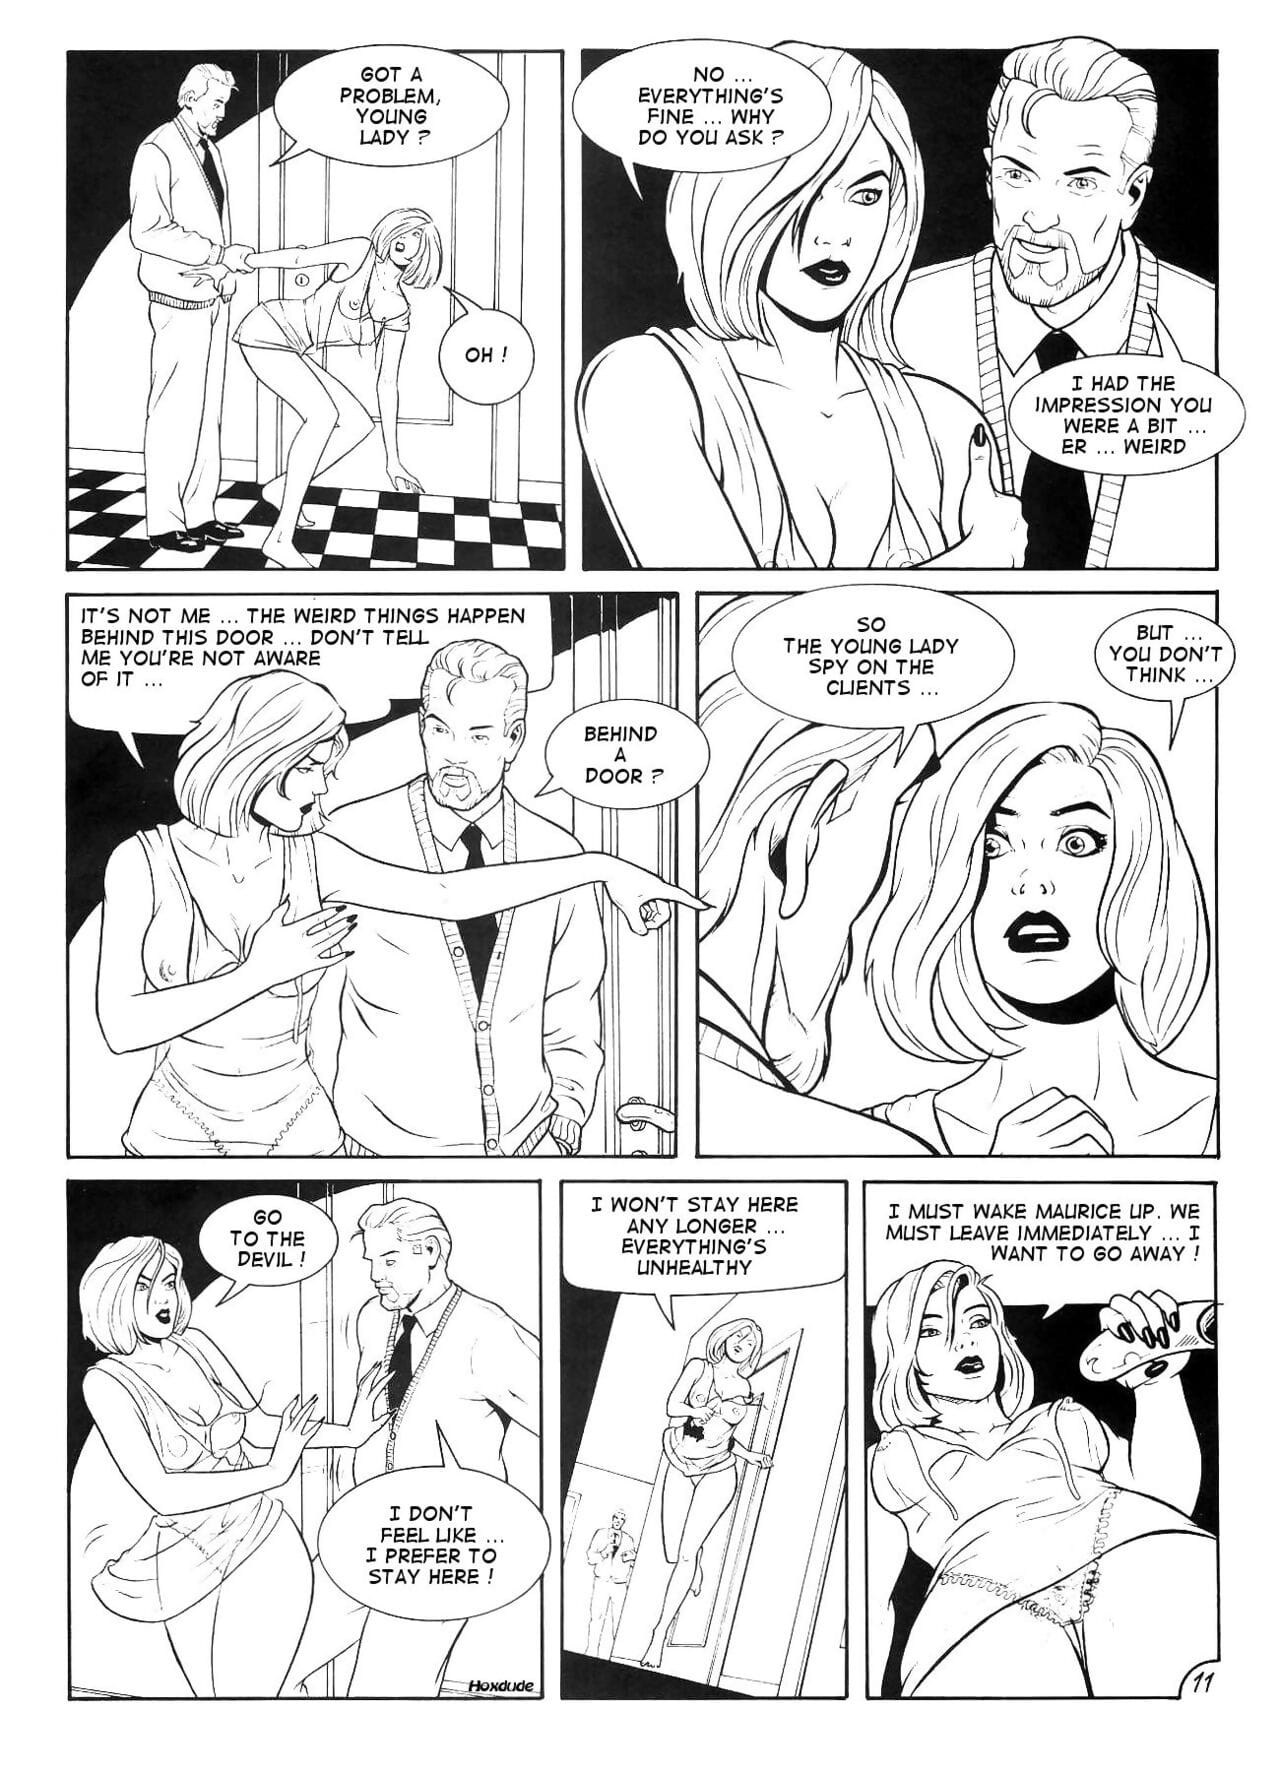 Hotel of Harsh Encounters page 1